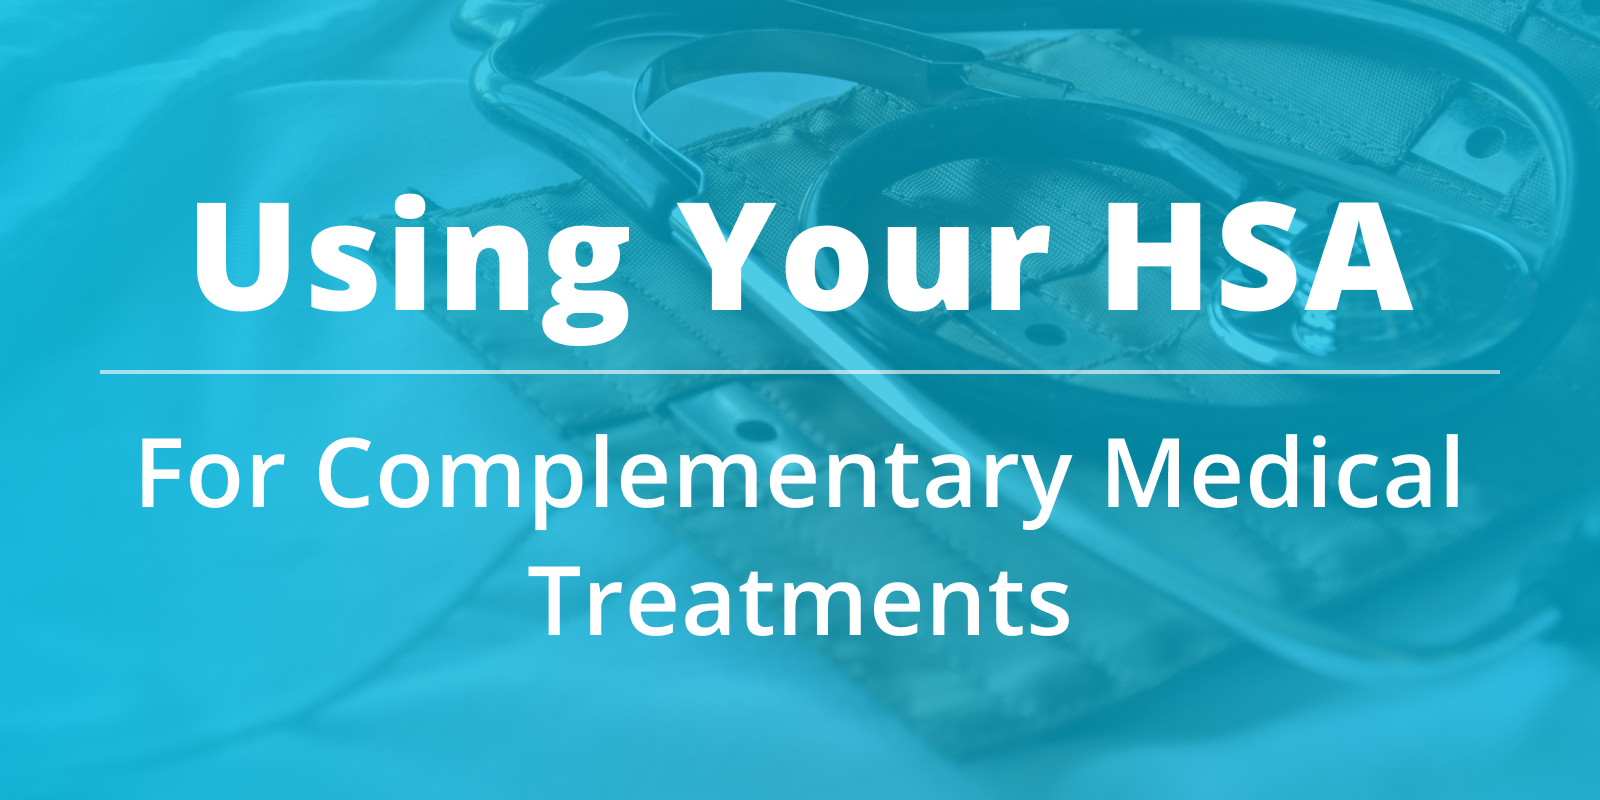 Using Your HSA for Complementary Medical Treatments